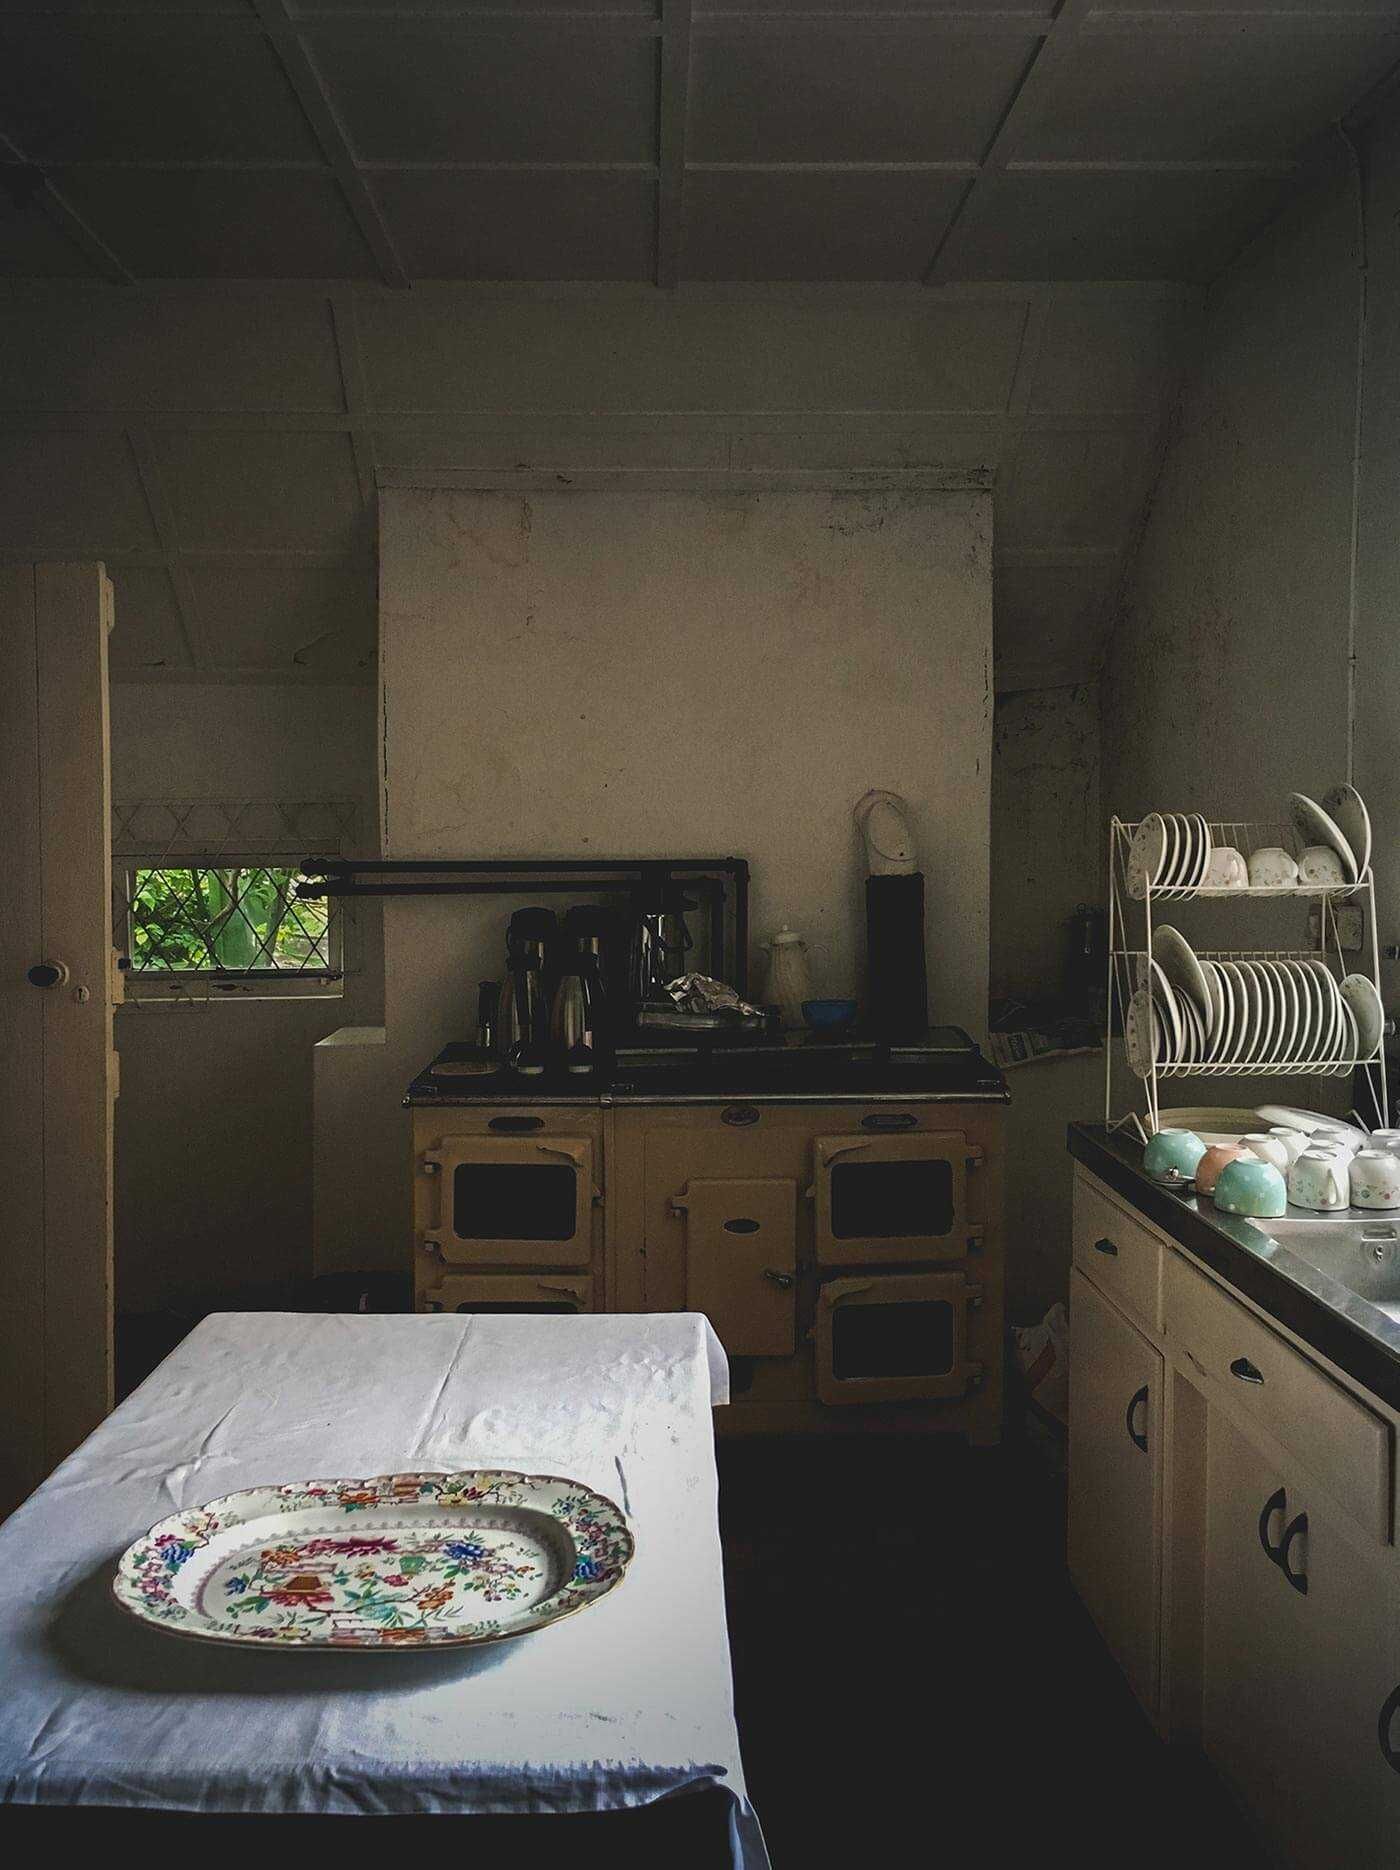 old kitchen with plates and bowls